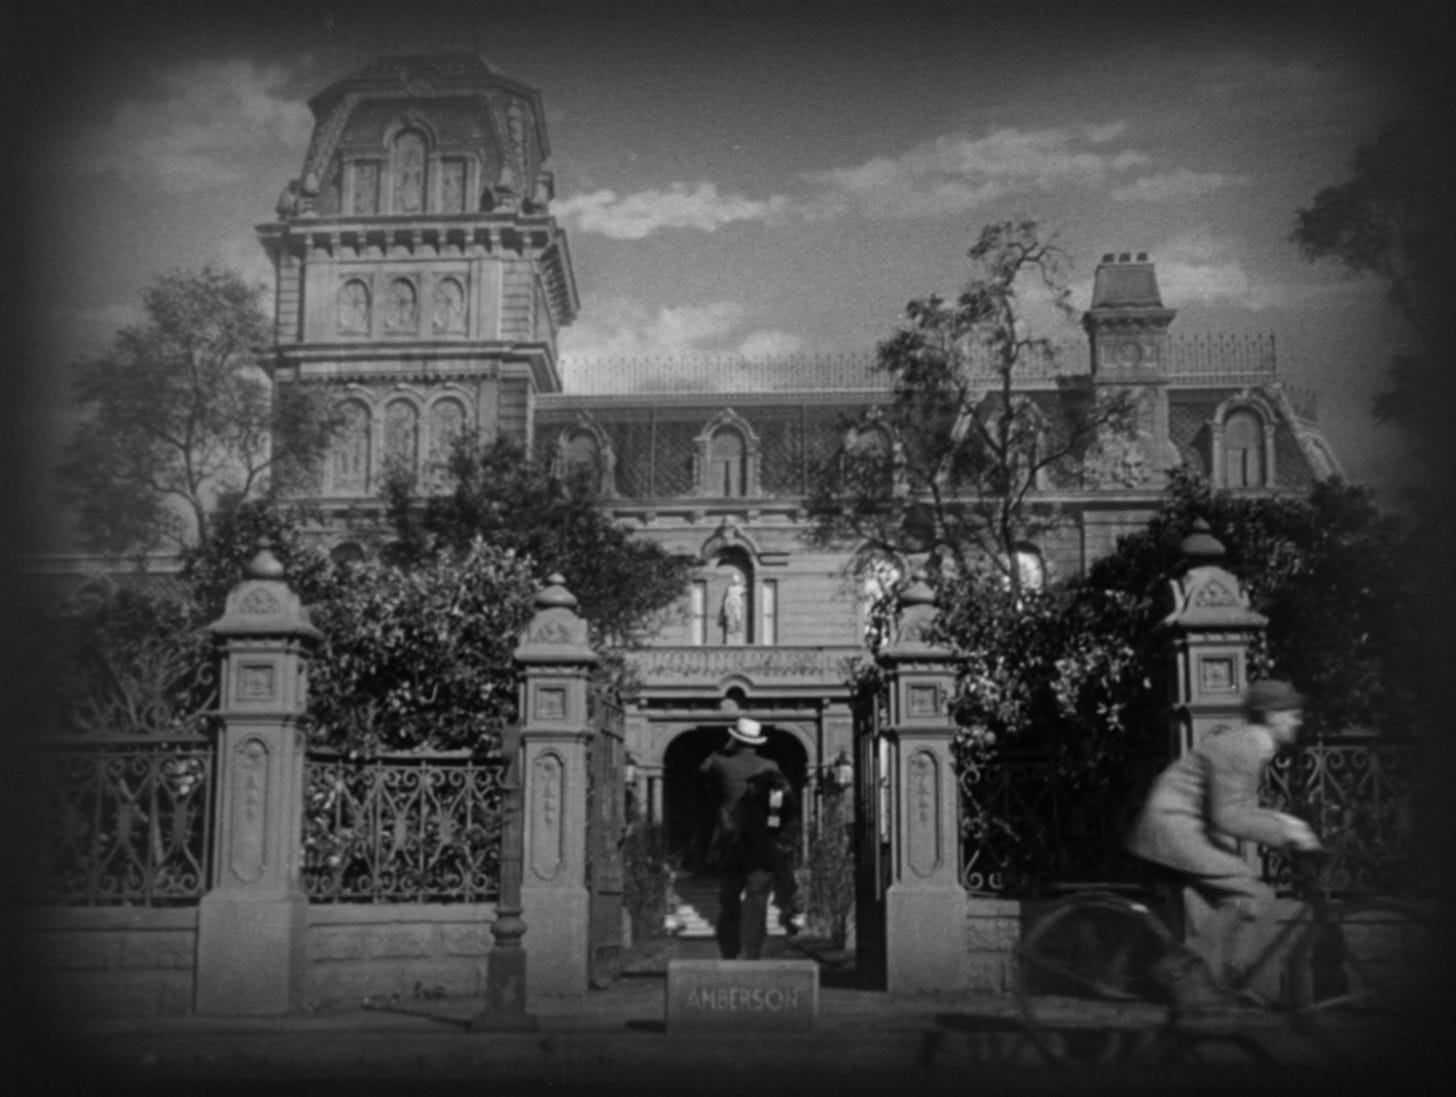 Orson Welles documents a family's dizzying decline in 'The Magnificent  Ambersons' | The Stanford Daily